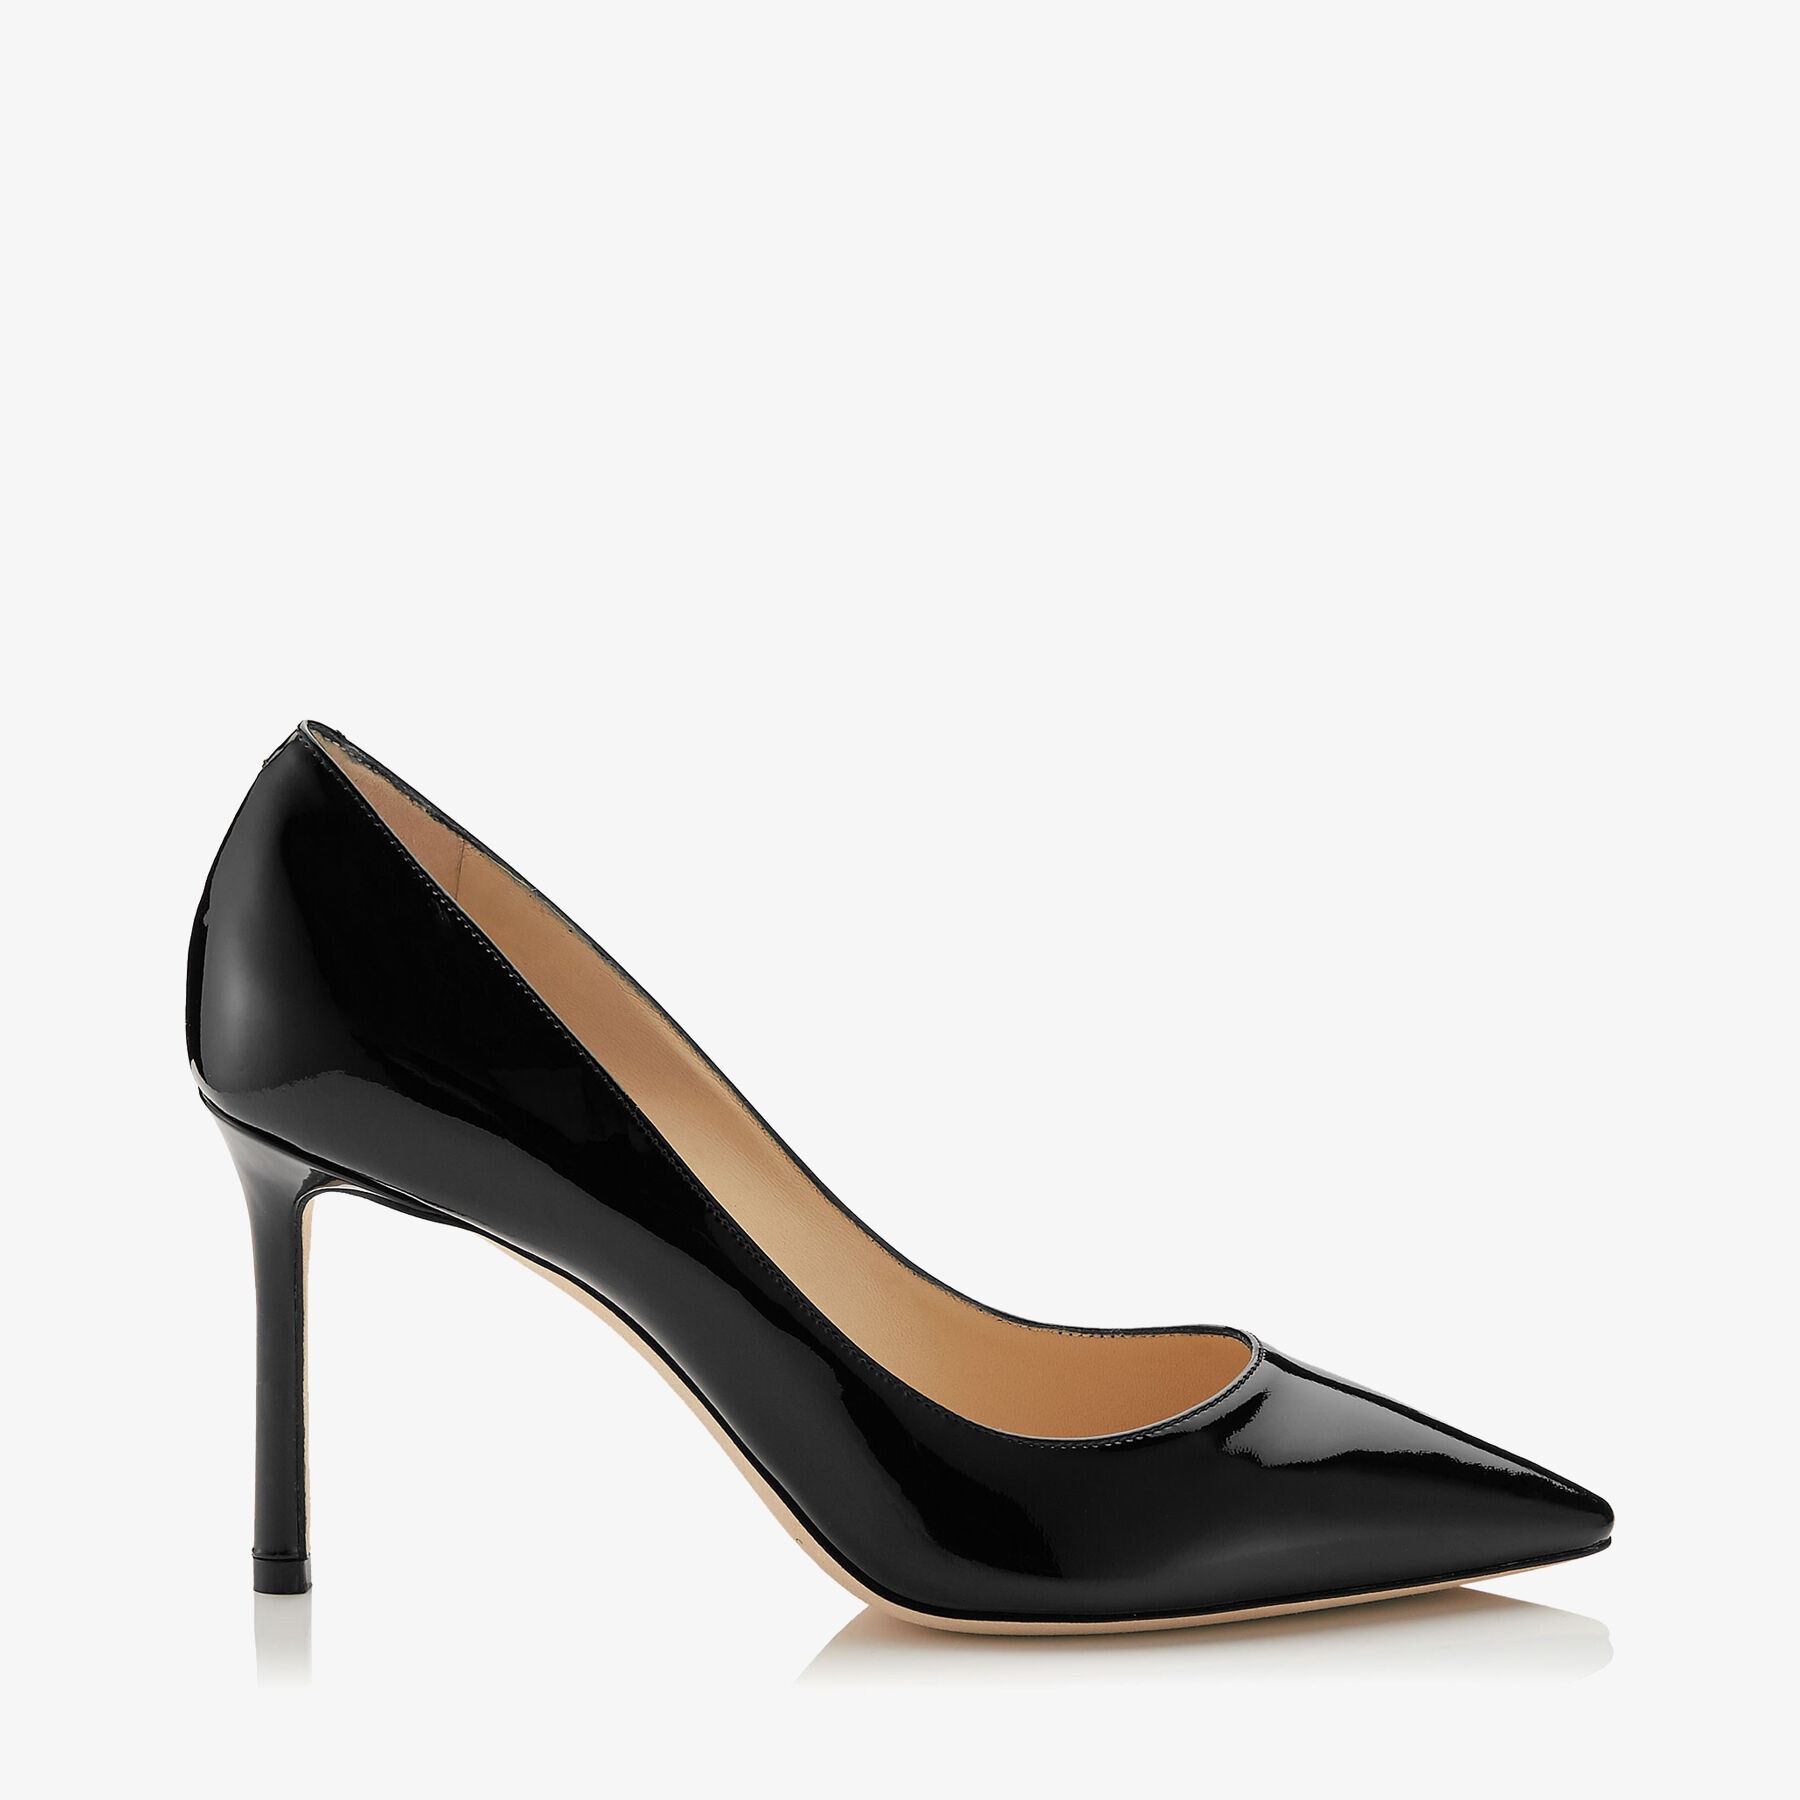 Romy 85
Black Patent Leather Pointy Toe Pumps - 1